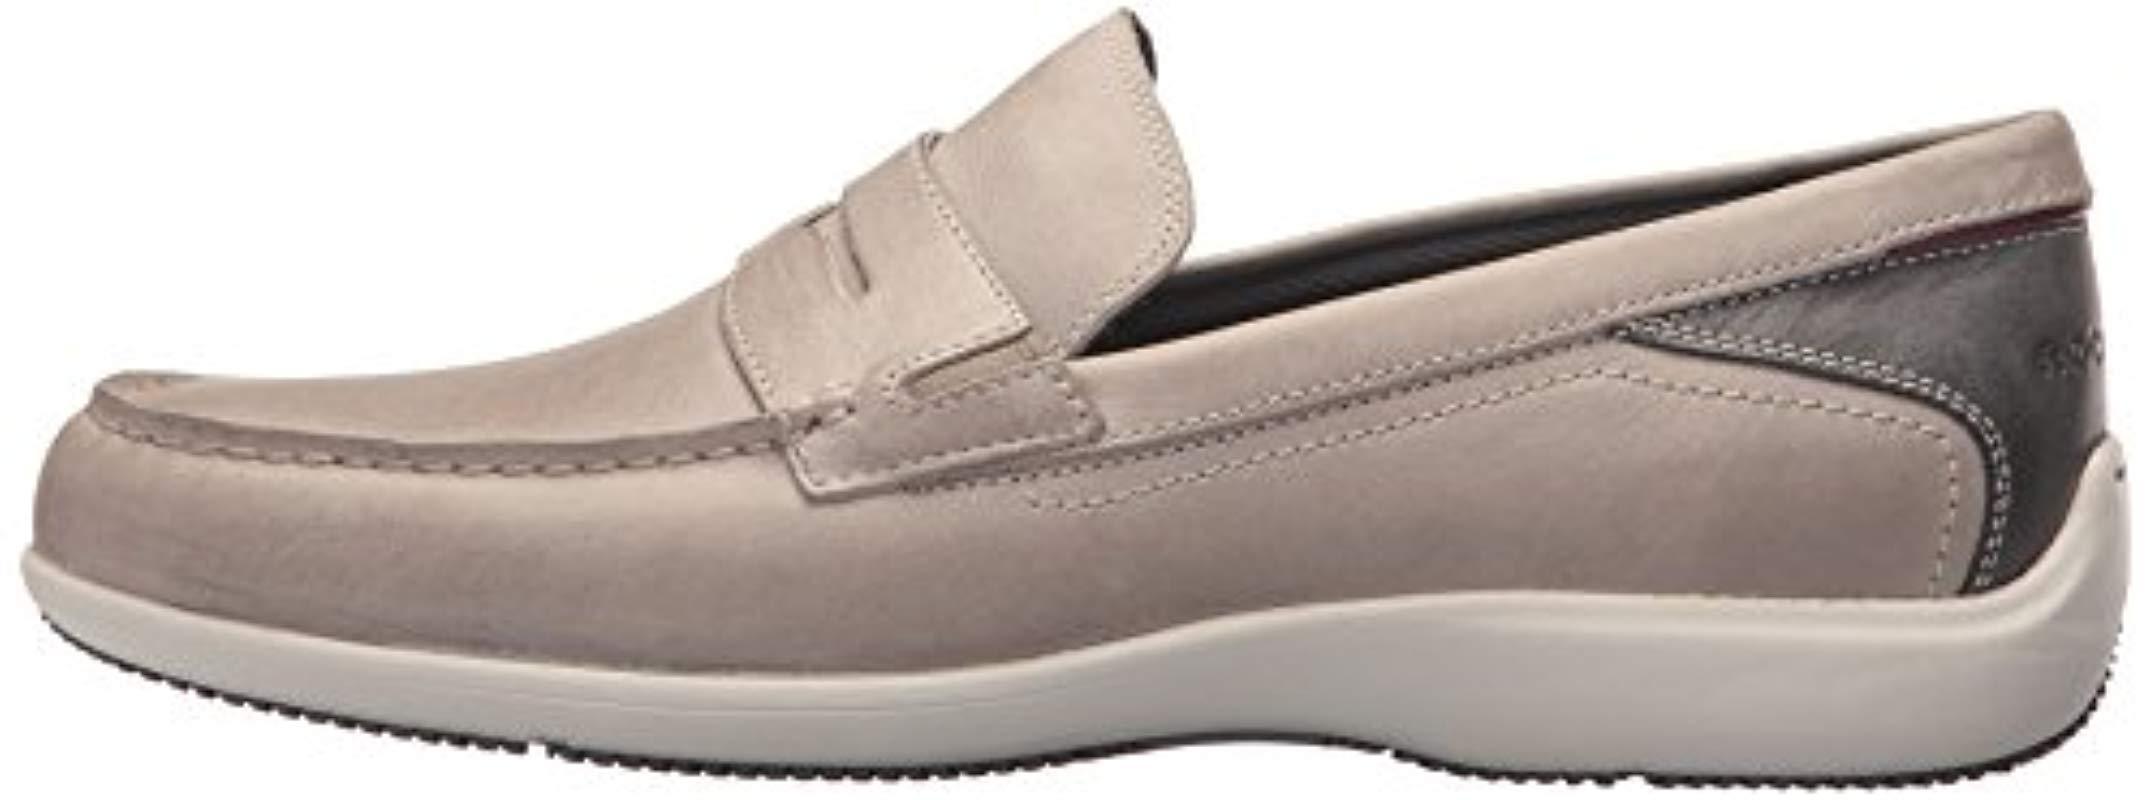 rockport aiden penny